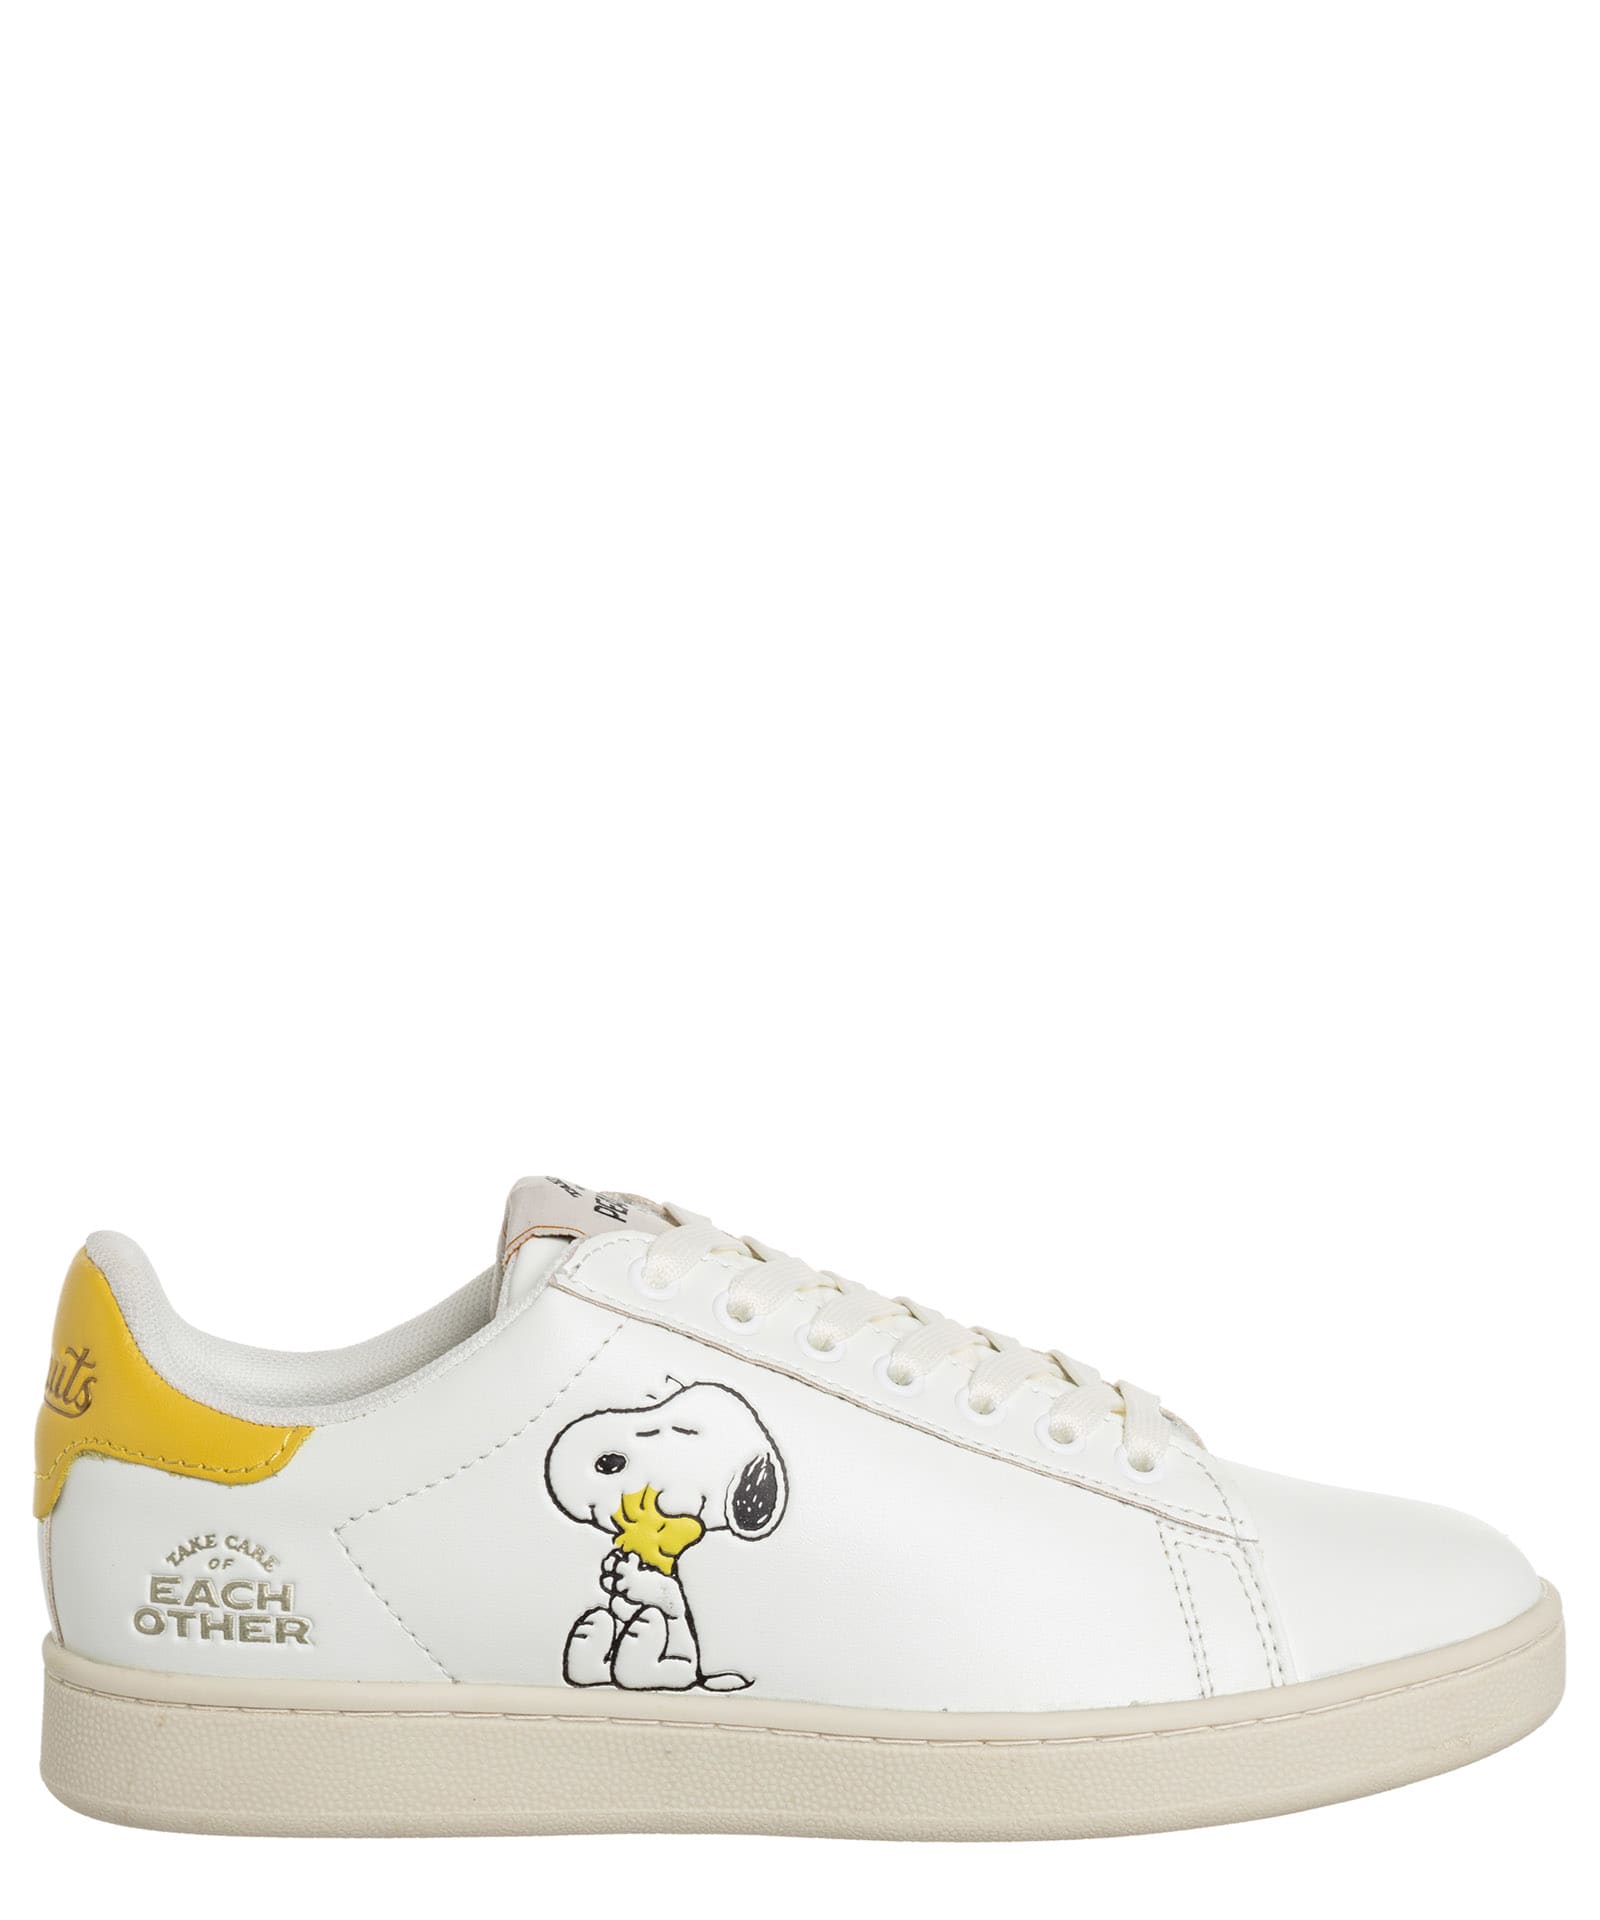 M.O.A. master of arts Peanuts Snoopy Gallery Snoopy Gallery Sneakers